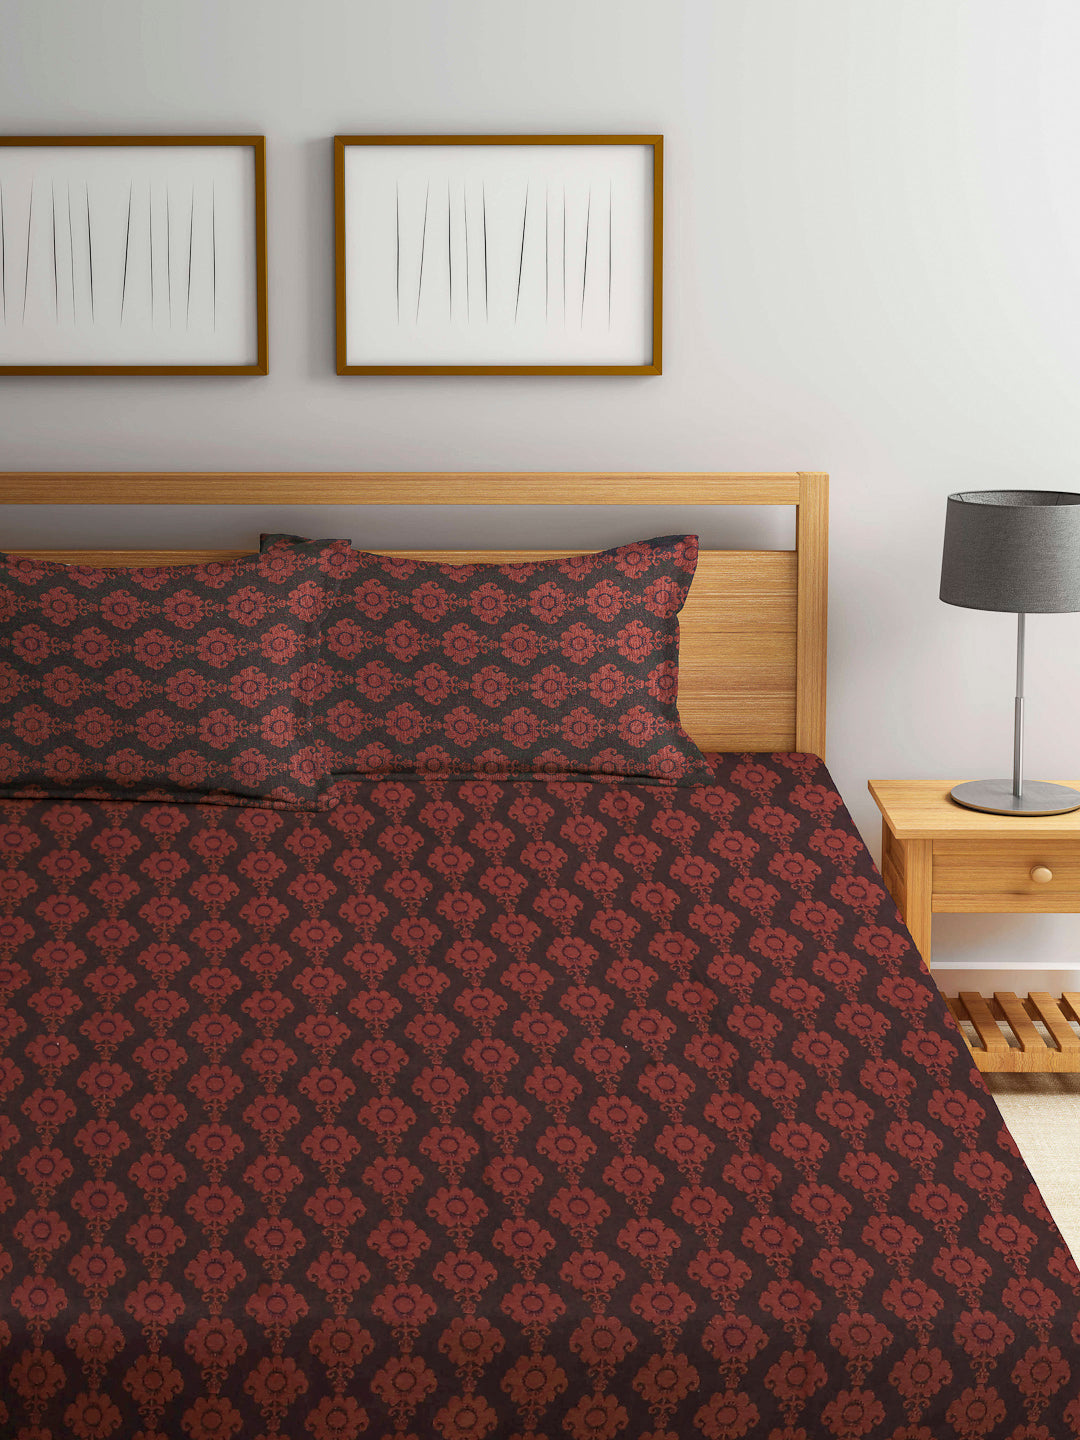 Arrabi Brown Indian Handwoven Cotton King Size Bedsheet with 2 Pillow Covers (260 X 230 cm)